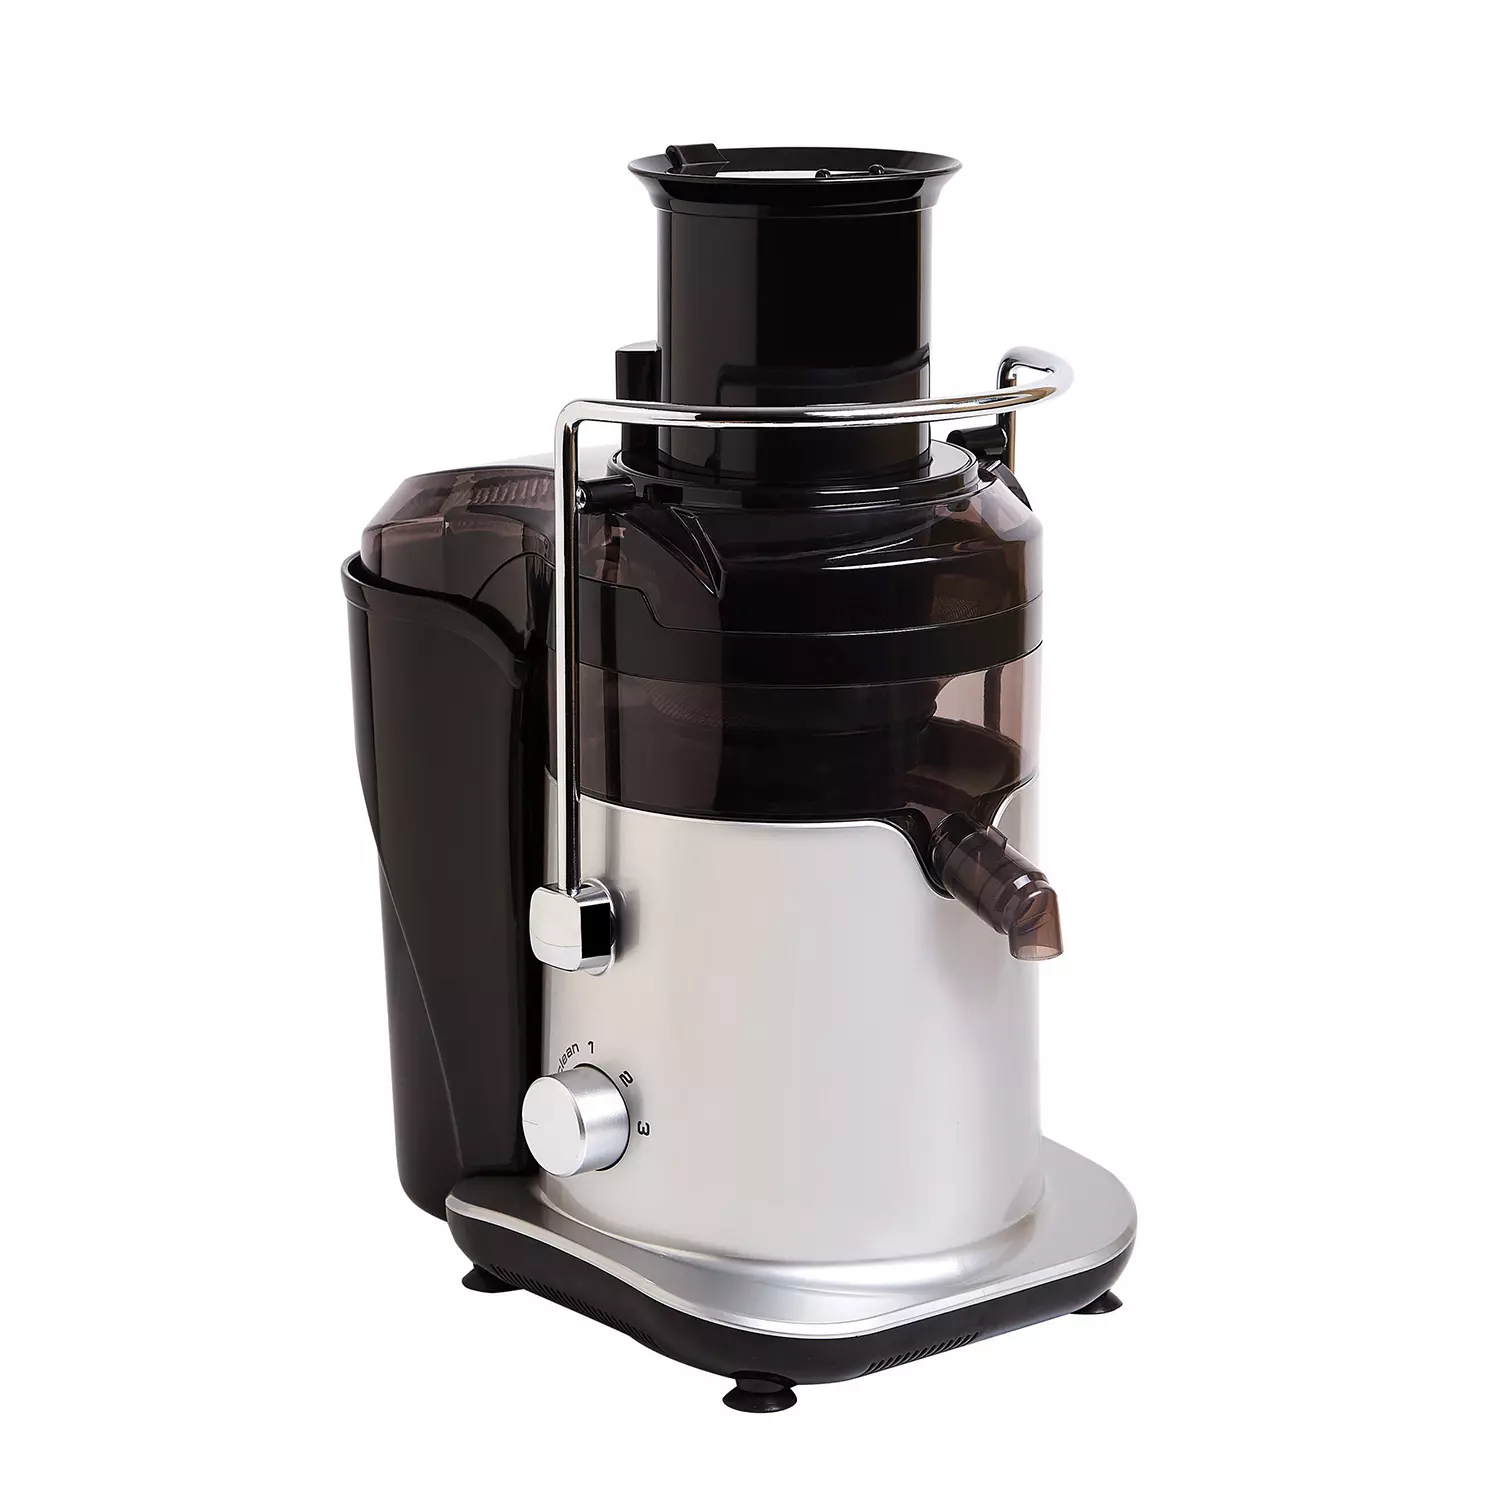 Sam’s Club: PowerXL Self-Cleaning 3-Speed Centrifugal Juicer ONLY $69.98 (Reg $89.98)